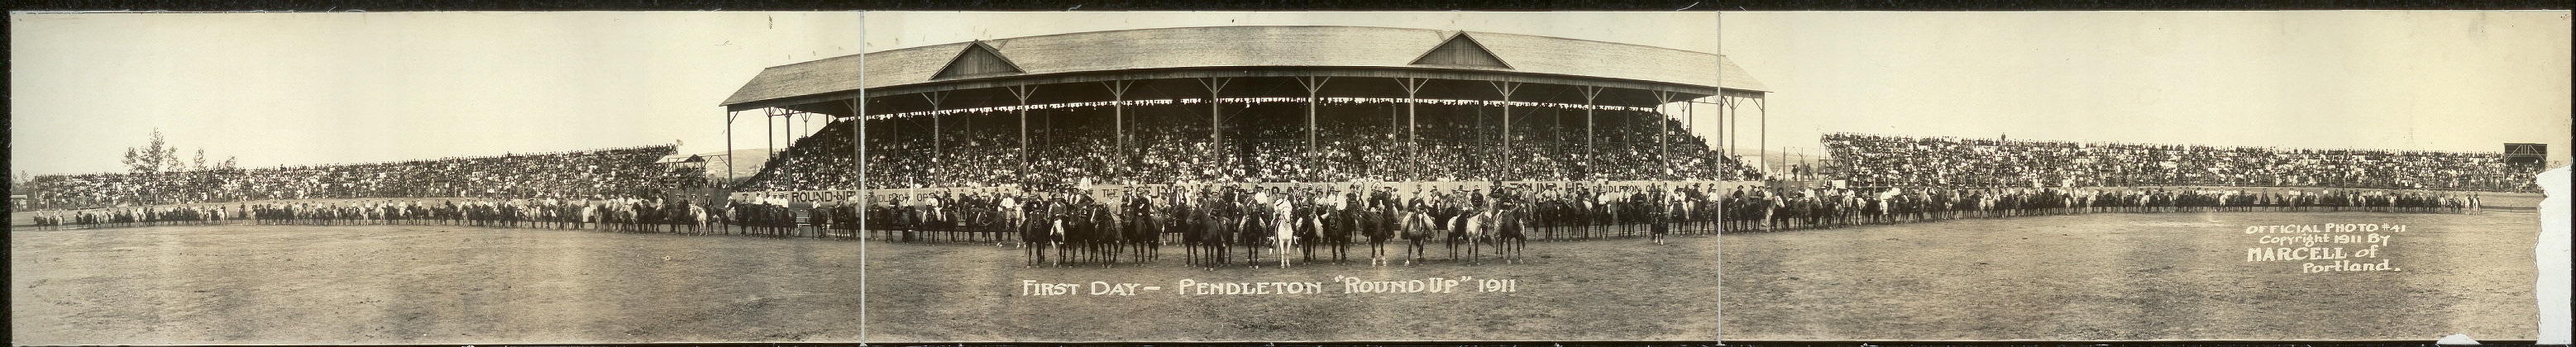 First day, Pendleton "Round Up", 1911